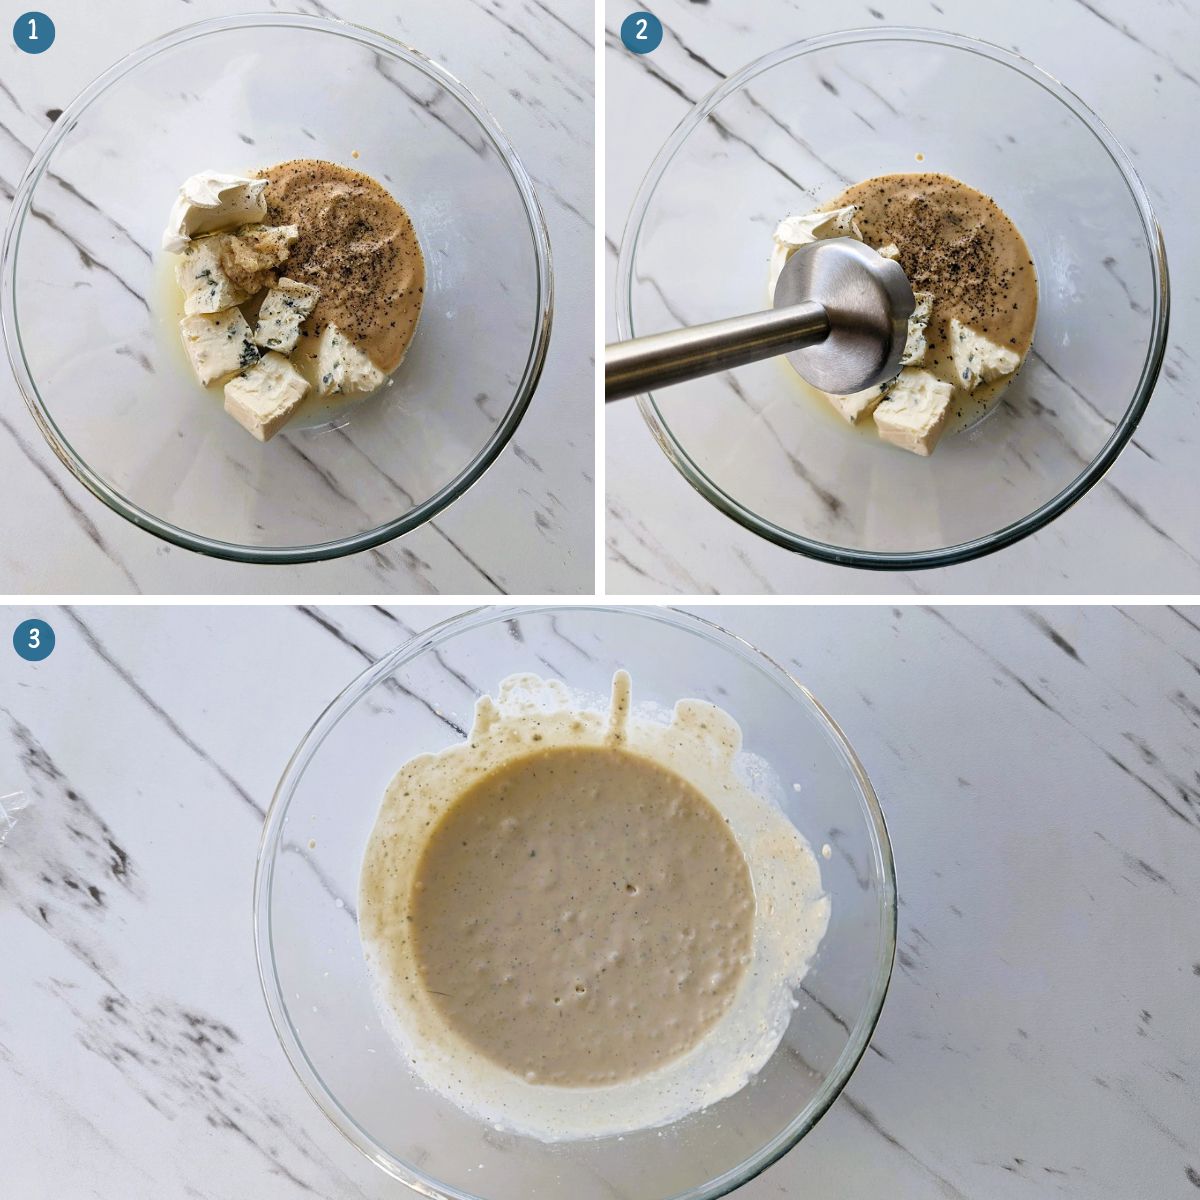 How to make blue cheese sauce